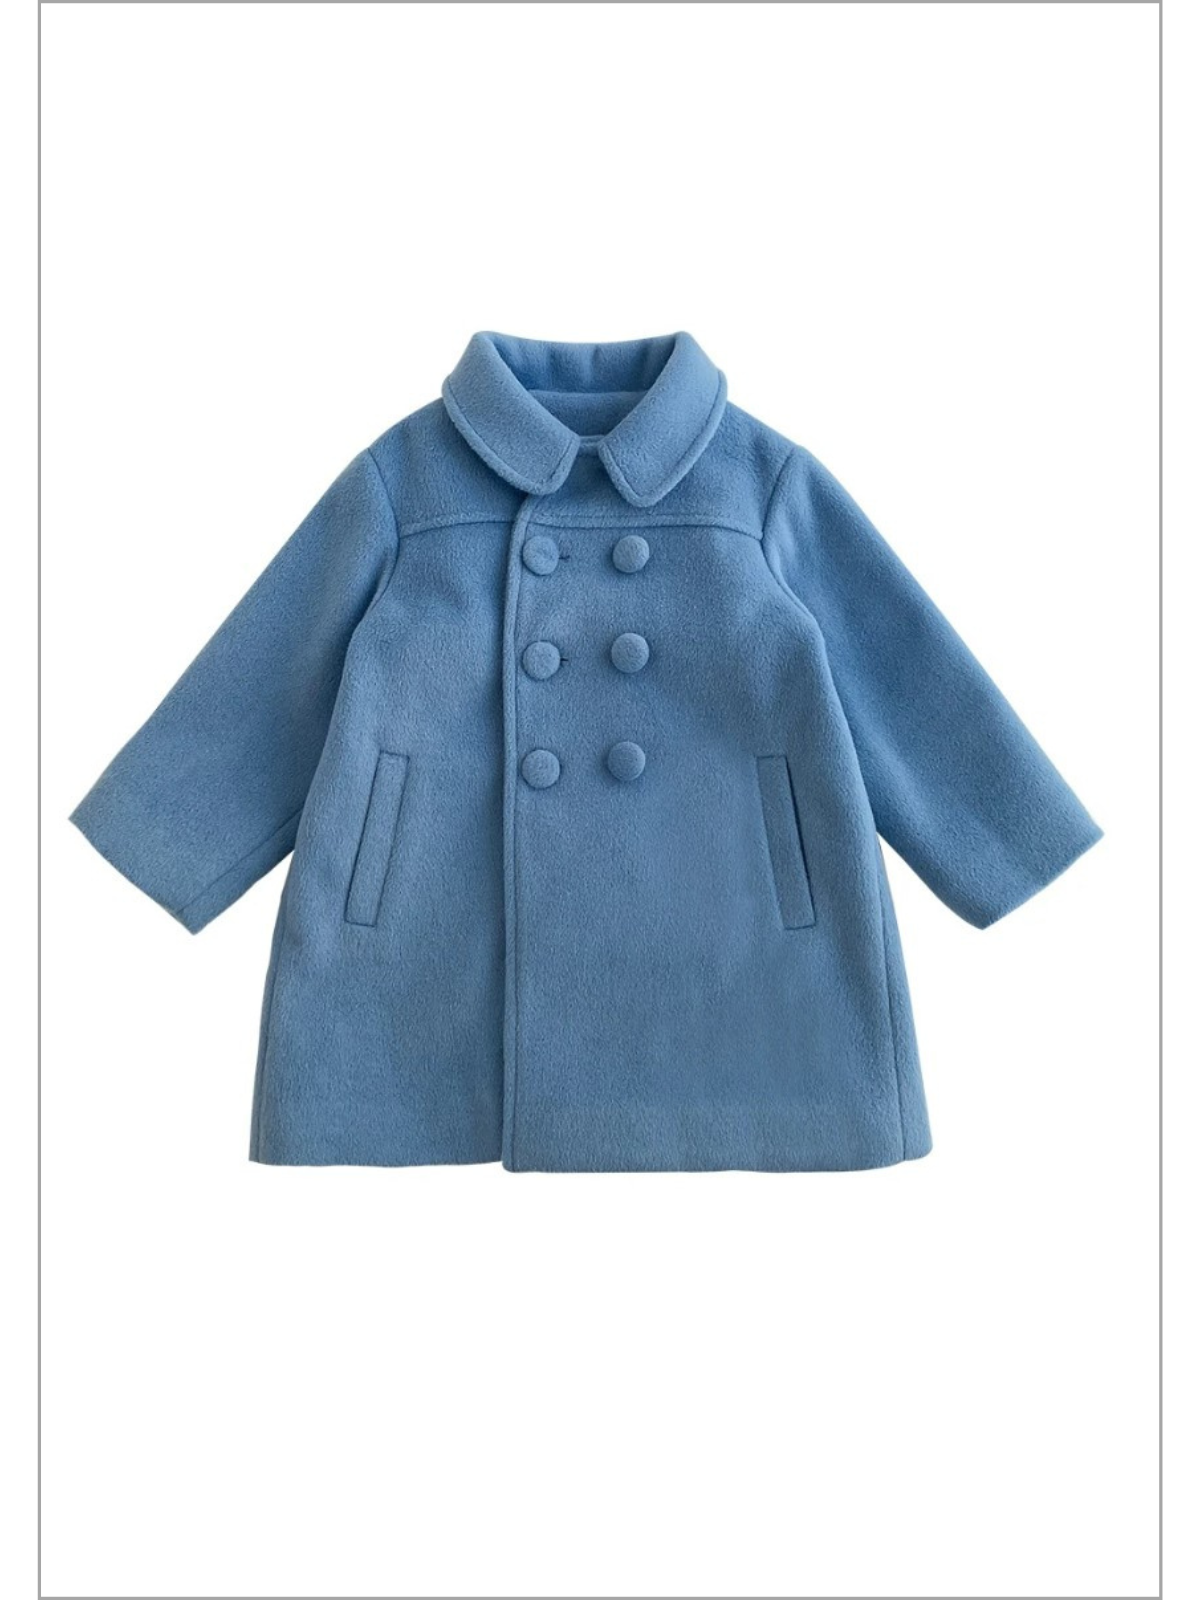 Cute Couture Double-Breasted Peacoat